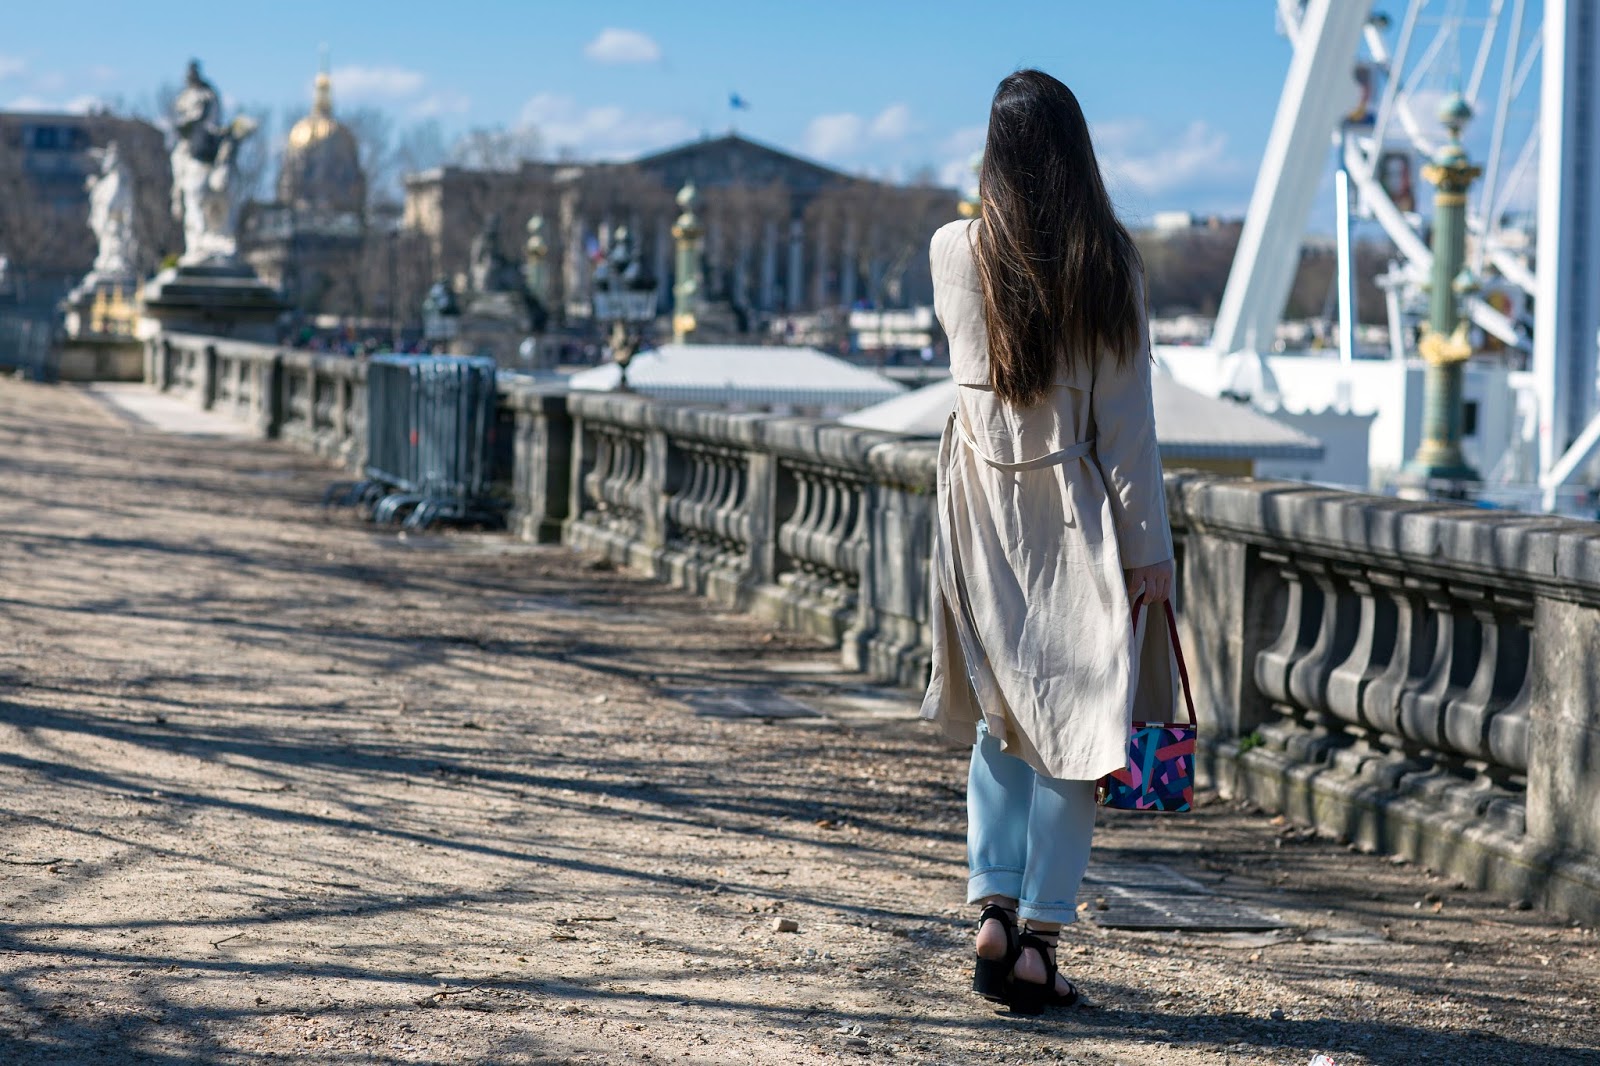 parisian fashion blogger, look, style, meet me in paree, chic style, chicwish